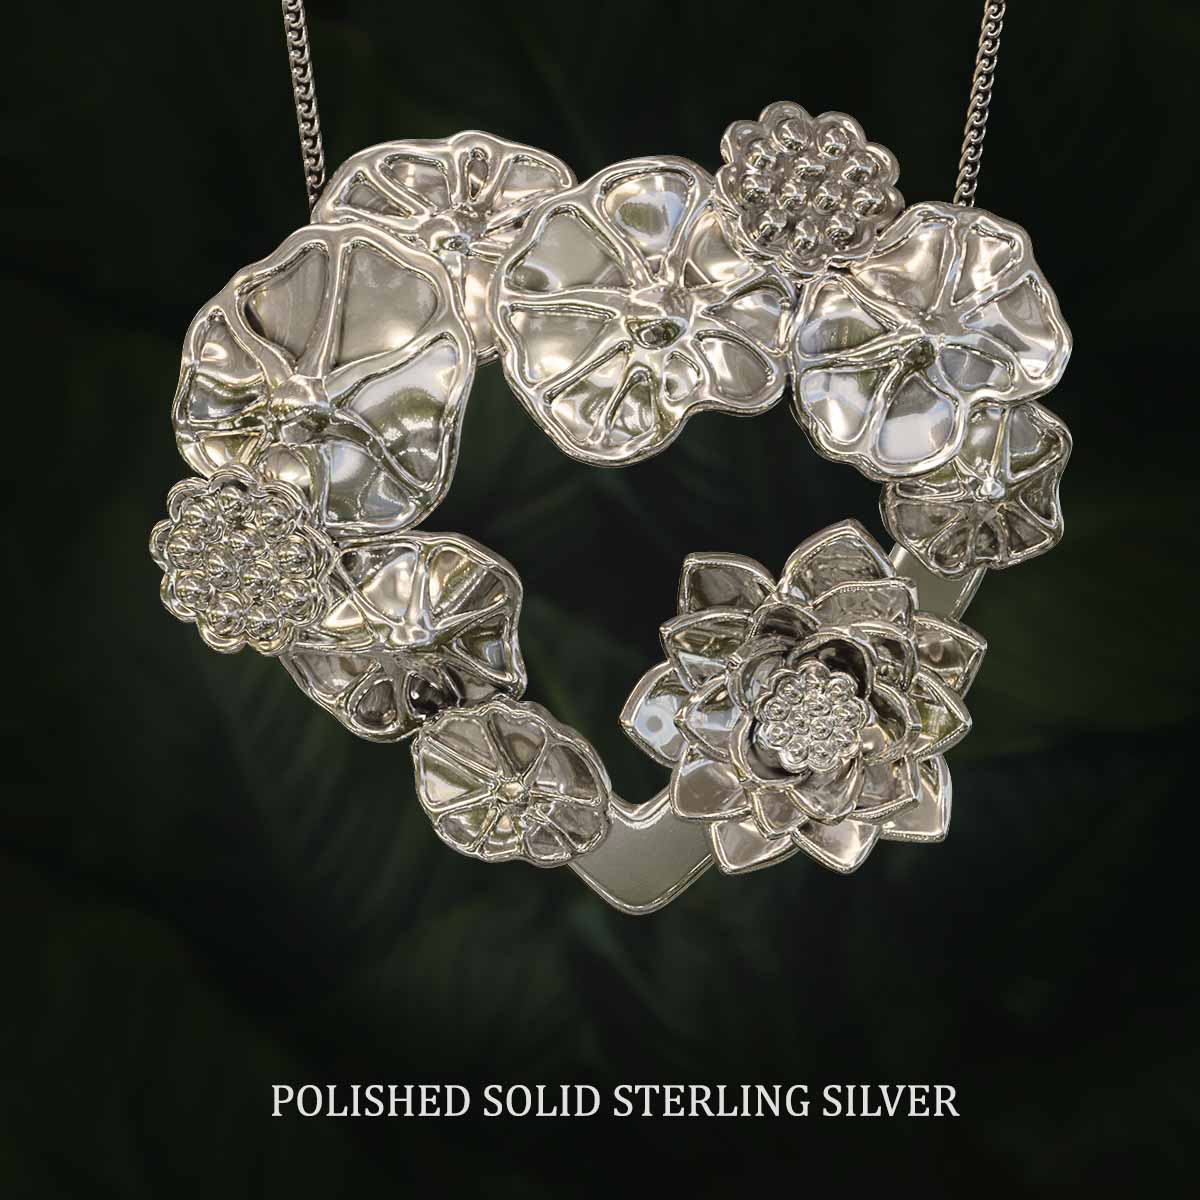 Polished-Solid-Sterling-Silver-Lotus-Leaves-with-Flower-and-Seed-Pods-Pendant-Jewelry-For-Necklace